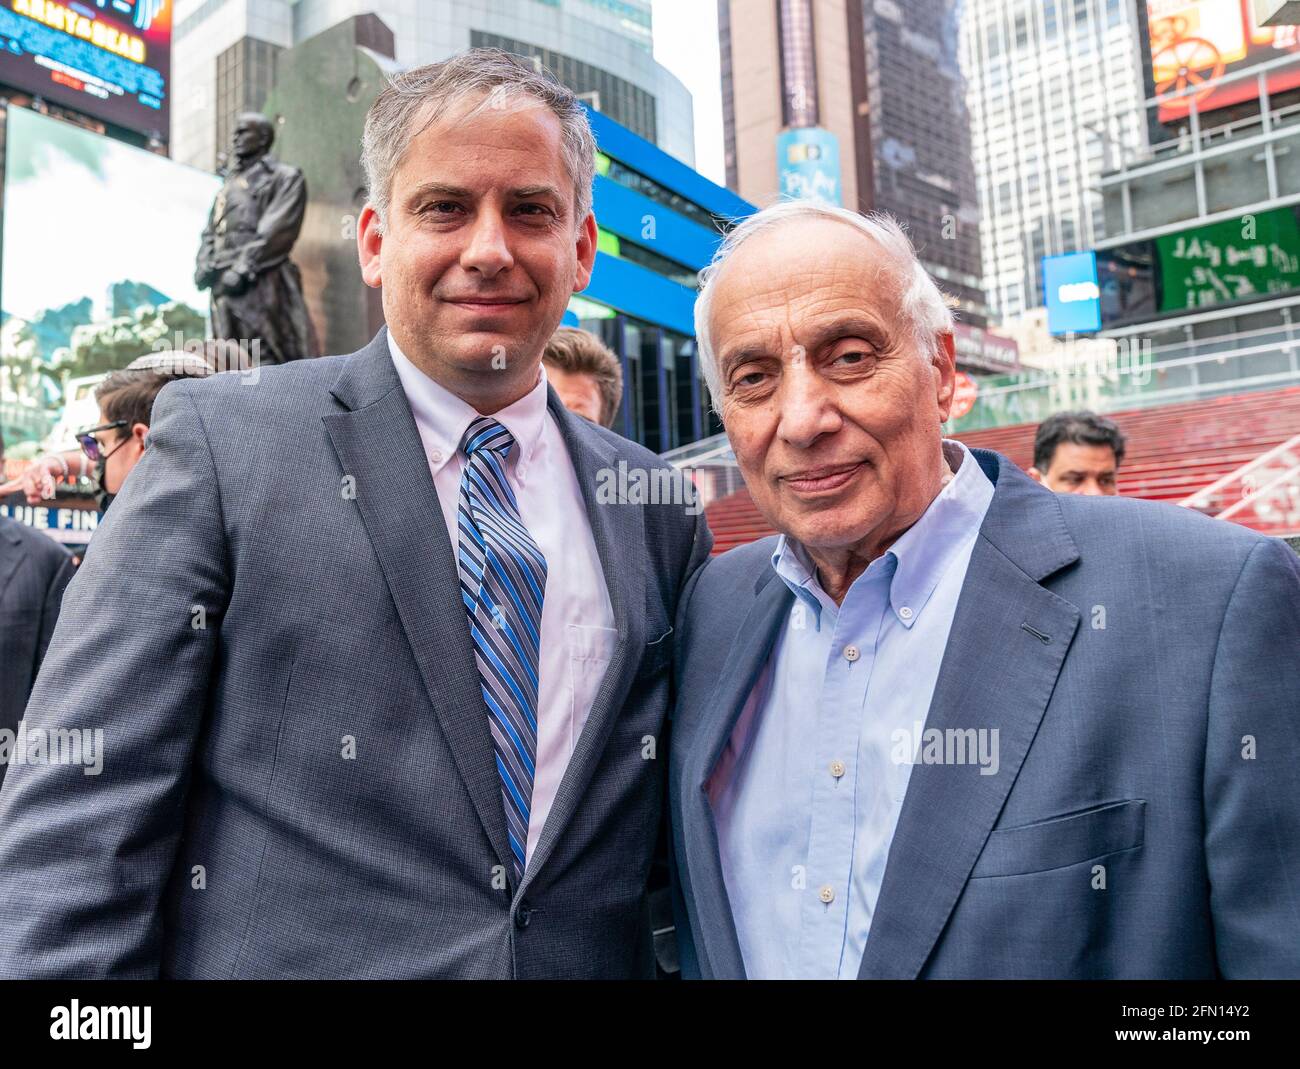 New York, United States. 12th May, 2021. Acting Consul General Israel Nitzan and Rabbi Avi Weiss attend rally in support of Israel stragles against Palestinian terrorists on Times Square in New York on May 12, 2021. More than 200 hundred supporters came for the rally. Protesters rally against HAMAS organization responsible for firing hundreds of rockets into civilian targets inside Israel. (Photo by Lev Radin/Sipa USA) Credit: Sipa USA/Alamy Live News Stock Photo